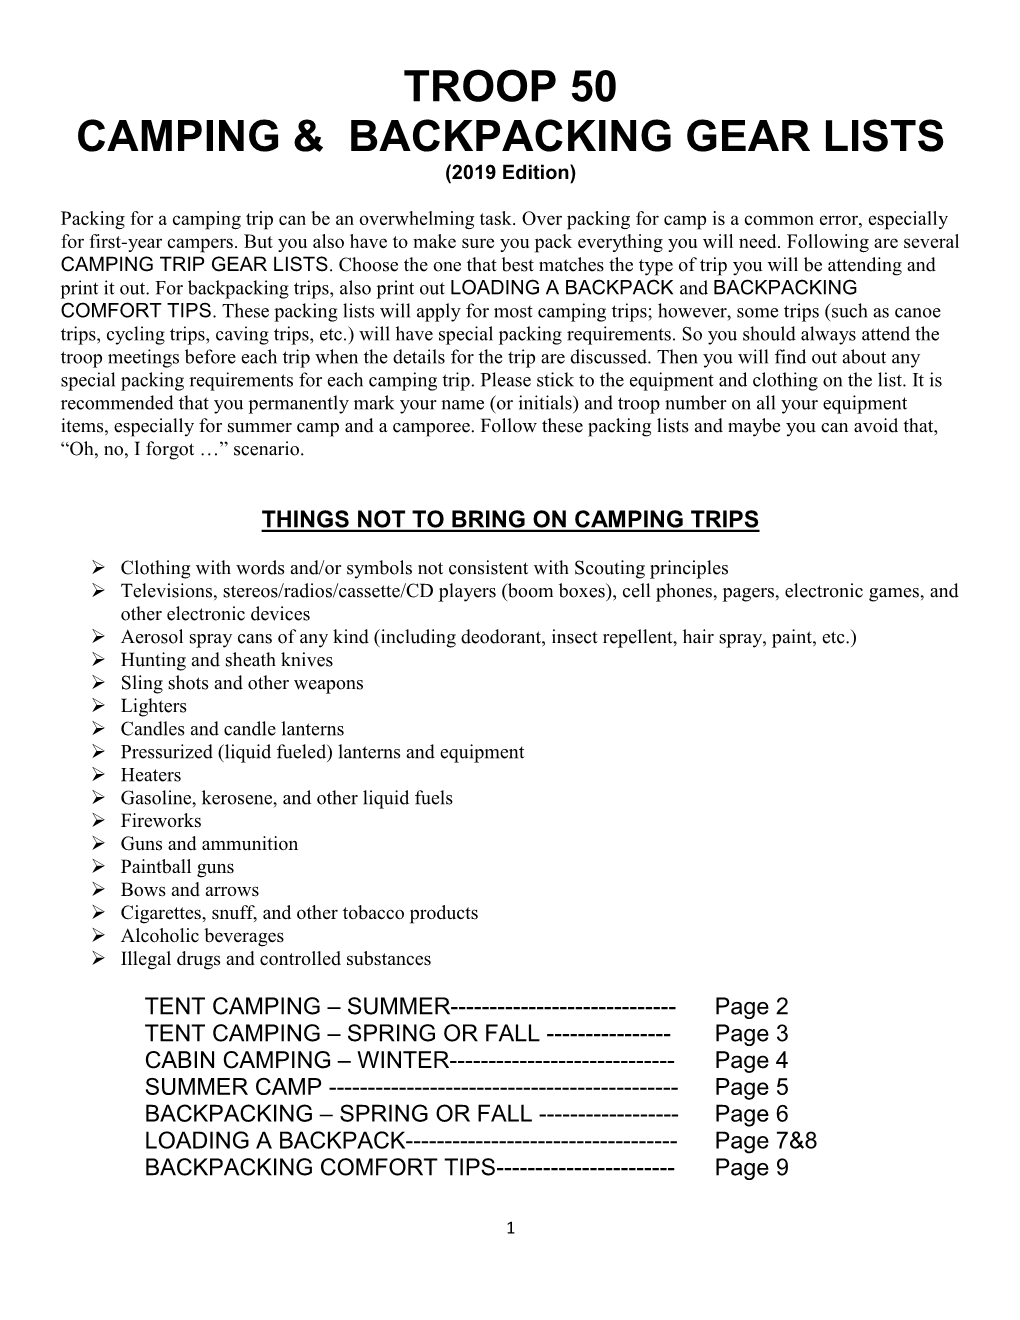 Troop 50 Camping & Backpacking Gear Lists